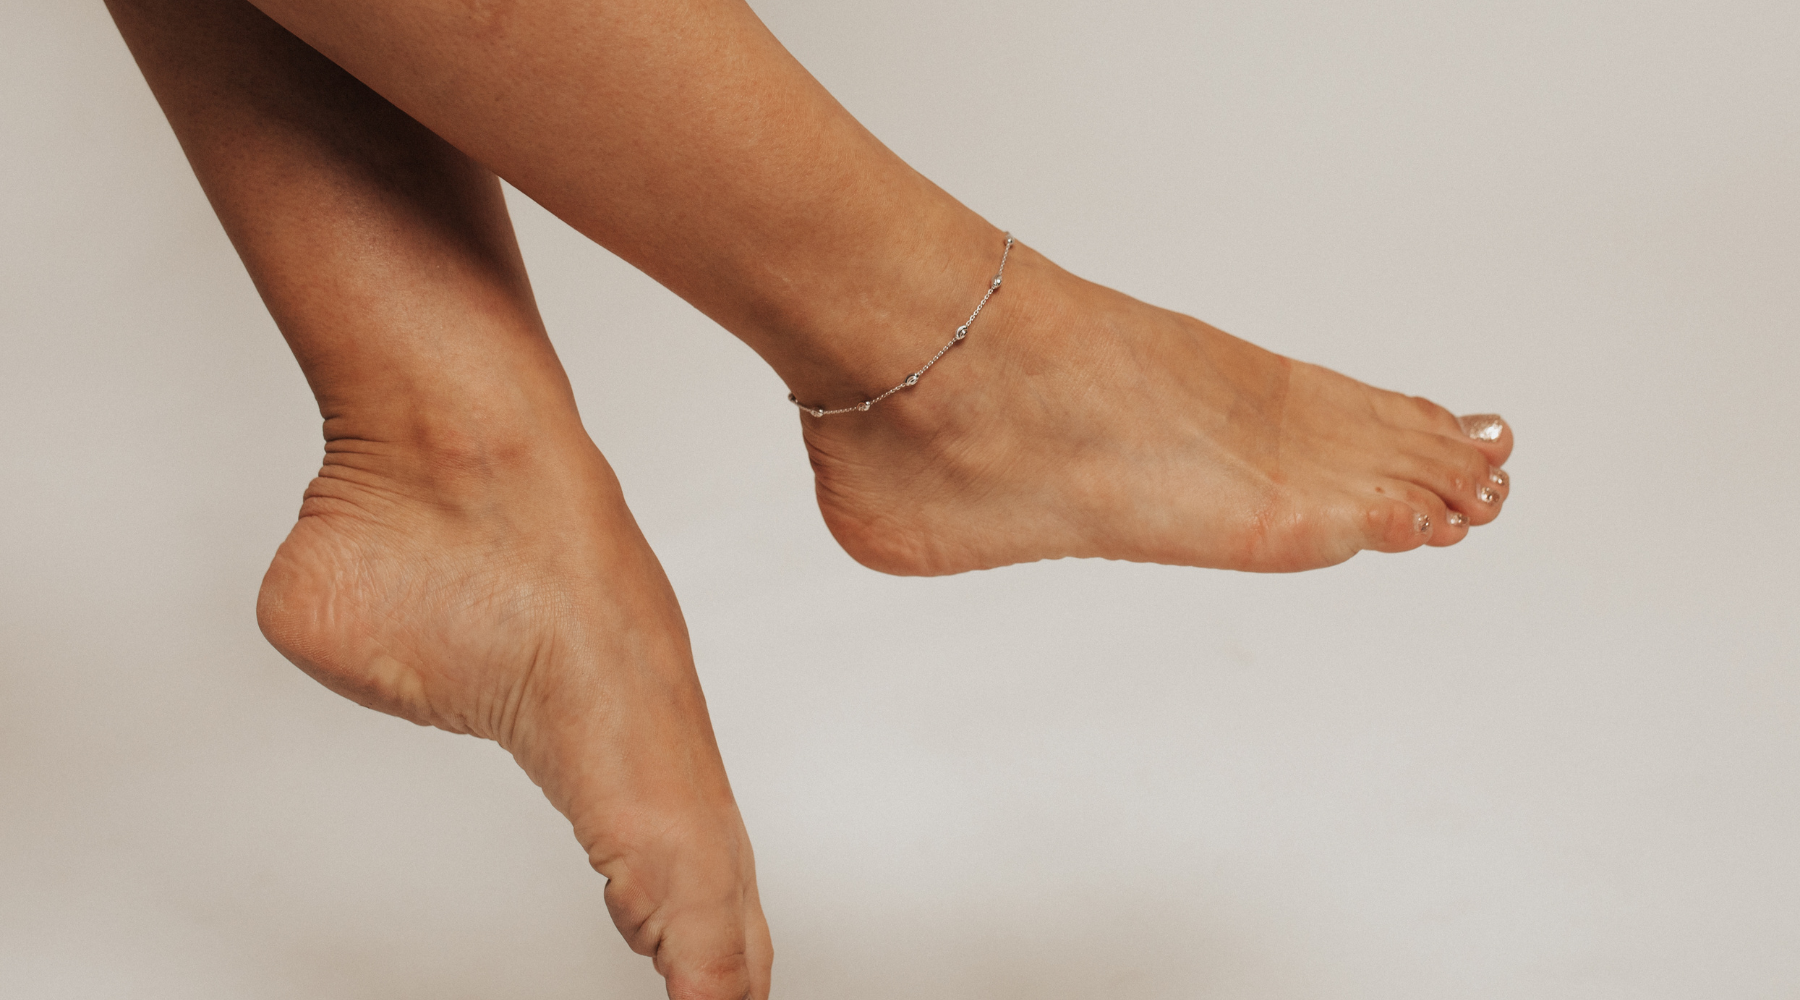 Why Do People Wear Anklets & What Do Anklets Symbolize?